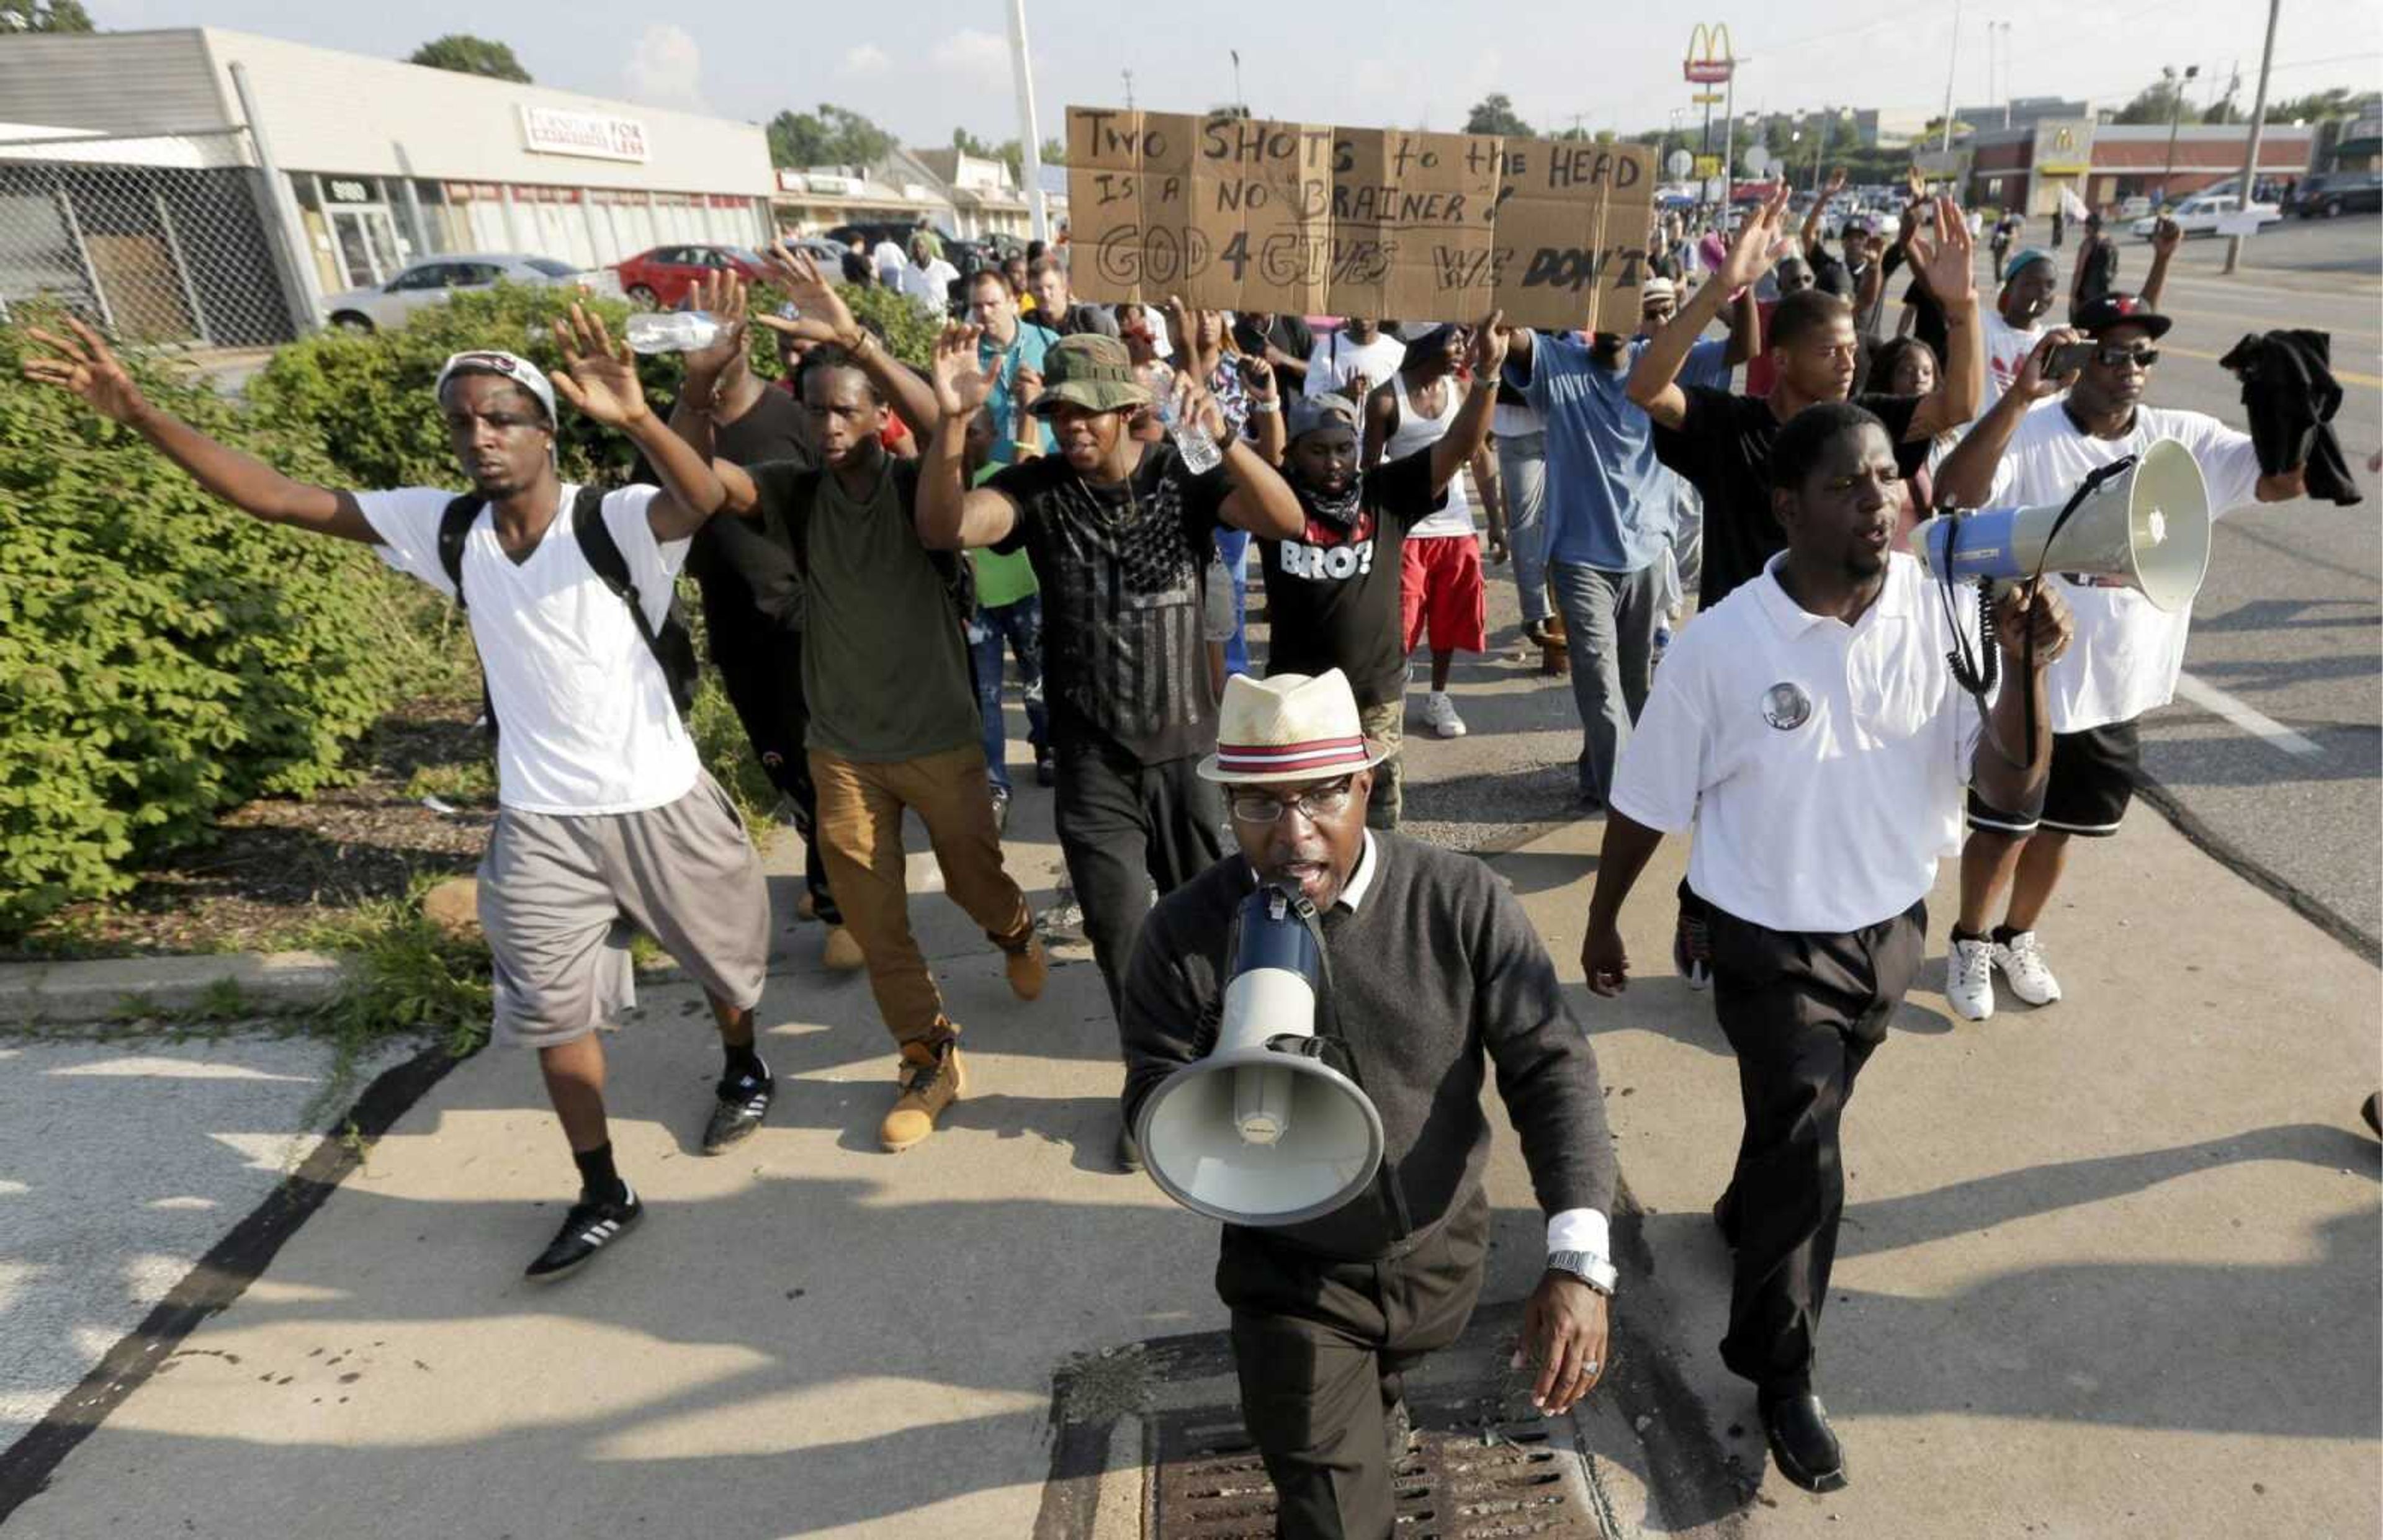 People march during a protest Monday for Michael Brown, who was killed by a police officer Aug. 9 in Ferguson, Mo. Brown's shooting has sparked more than a week of protests, riots and looting in the St. Louis suburb. (AP Photo/Charlie Riedel)